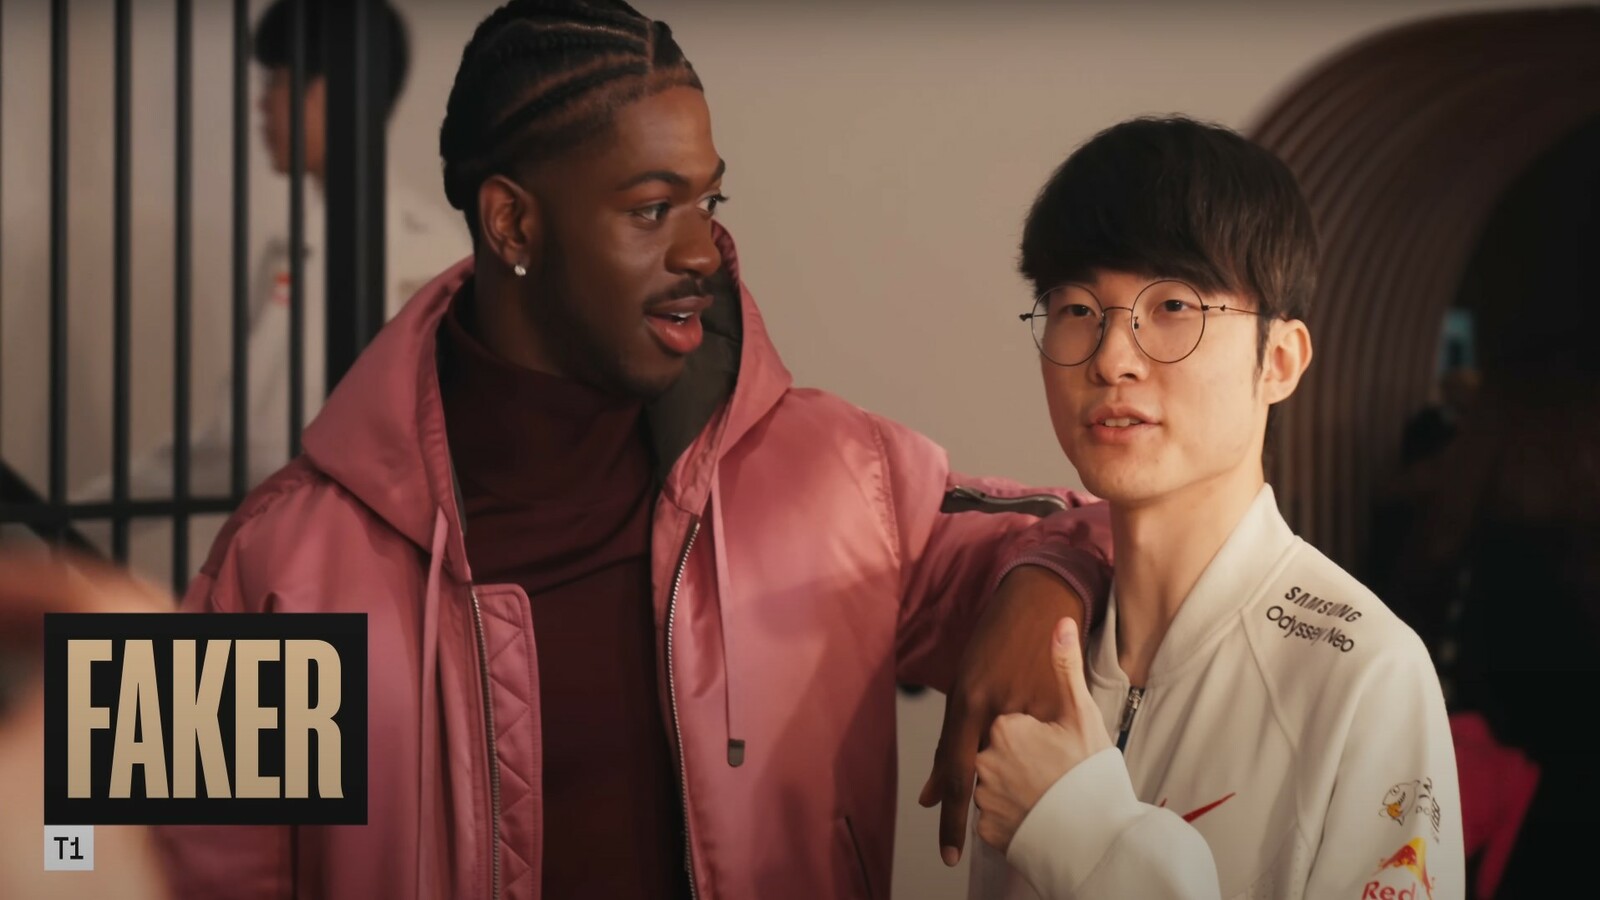 Riot shows wholesome interaction between Lil Nas X and Faker